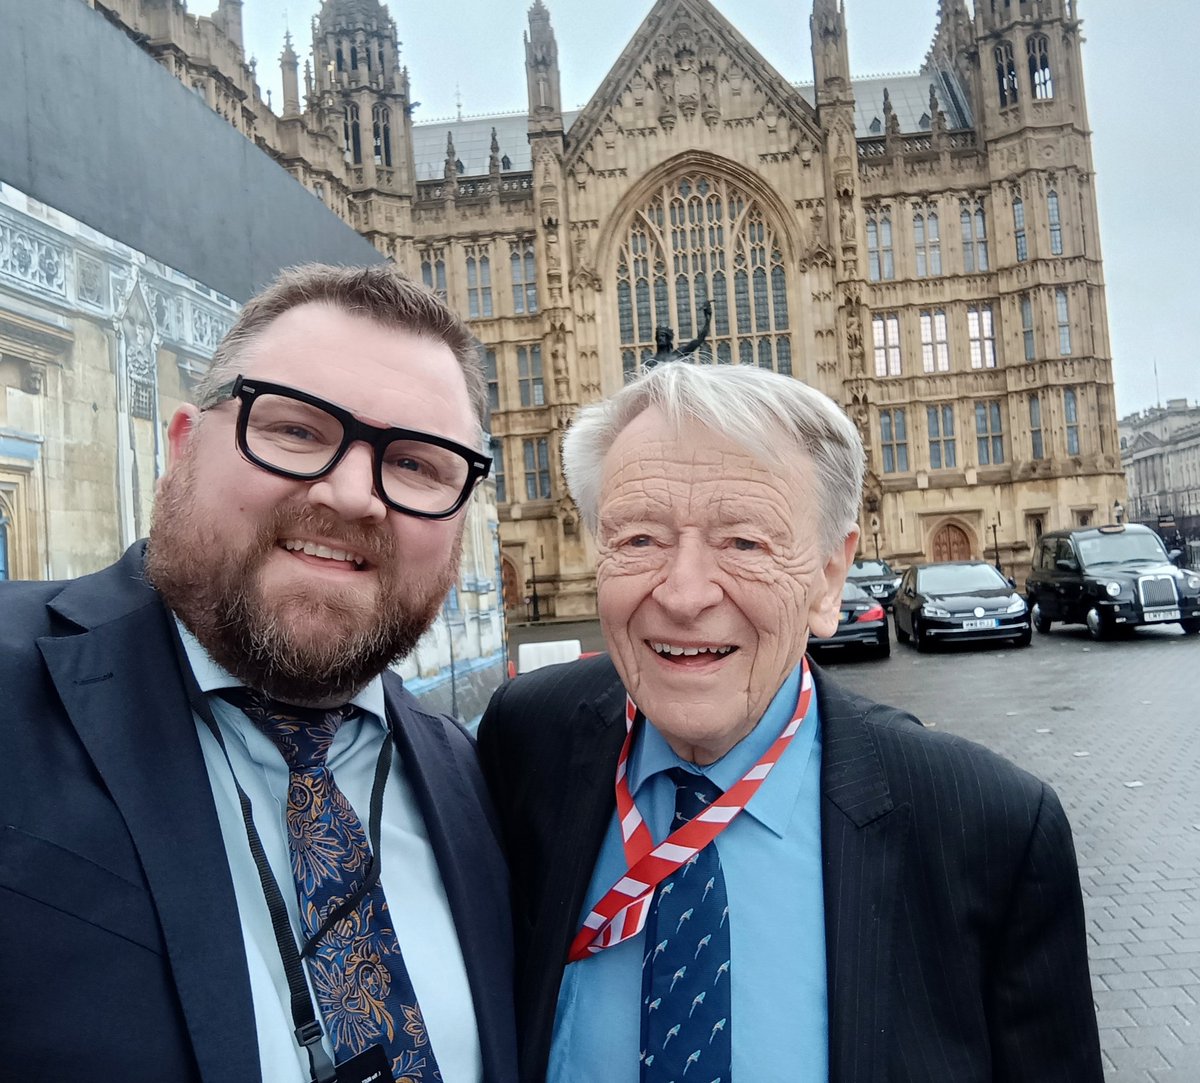 An honour to spend time with Lord Dubs @AlfDubs in the House of Lords today and telling him about the work @sanctuaryinchi do supporting refugees and asylum seekers. Such a lovely man! Thank you @LadyBasildon for helping me to meet one of my heroes.